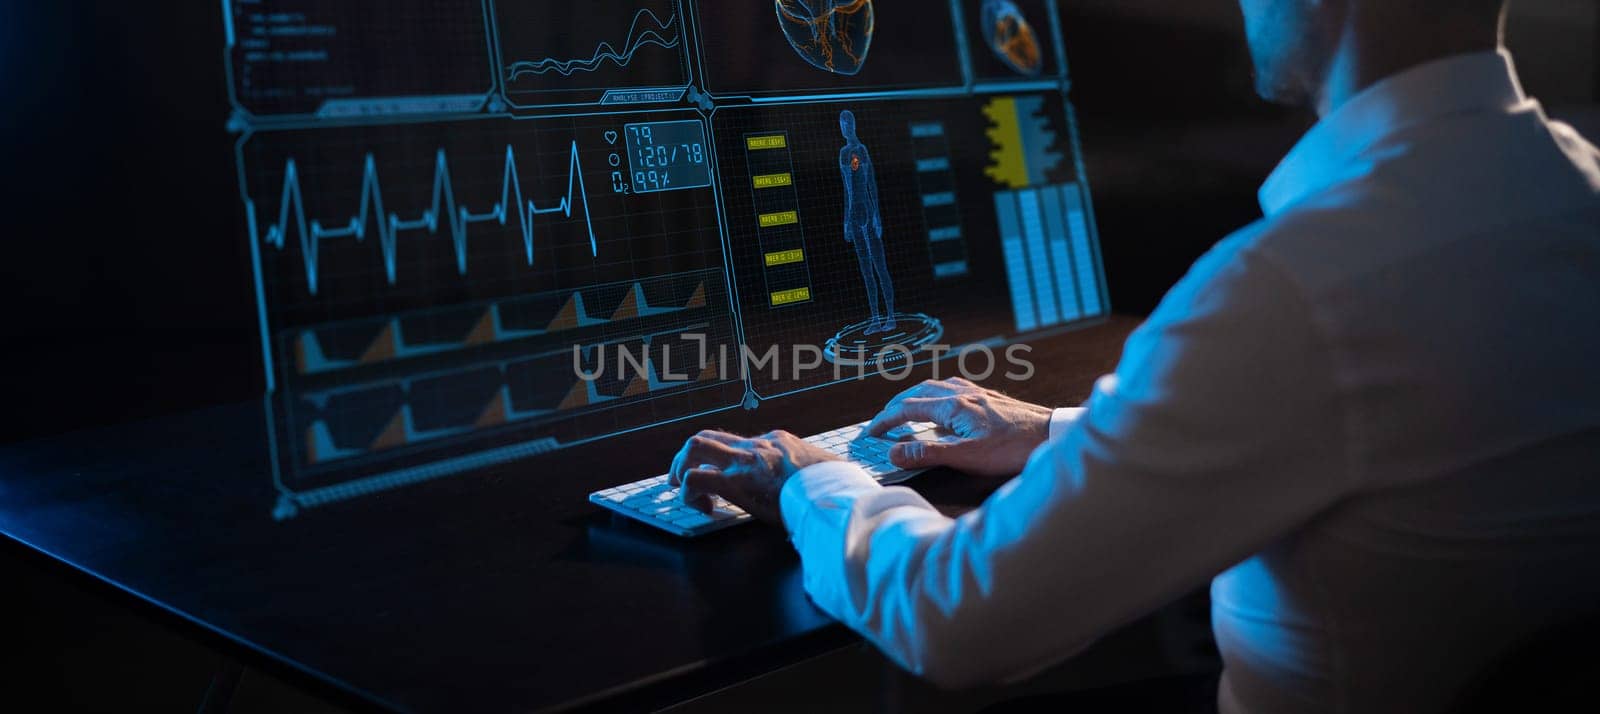 Close-up of male hands on a keyboard in the dark in front of a virtual menu. Readings on the life support monitor